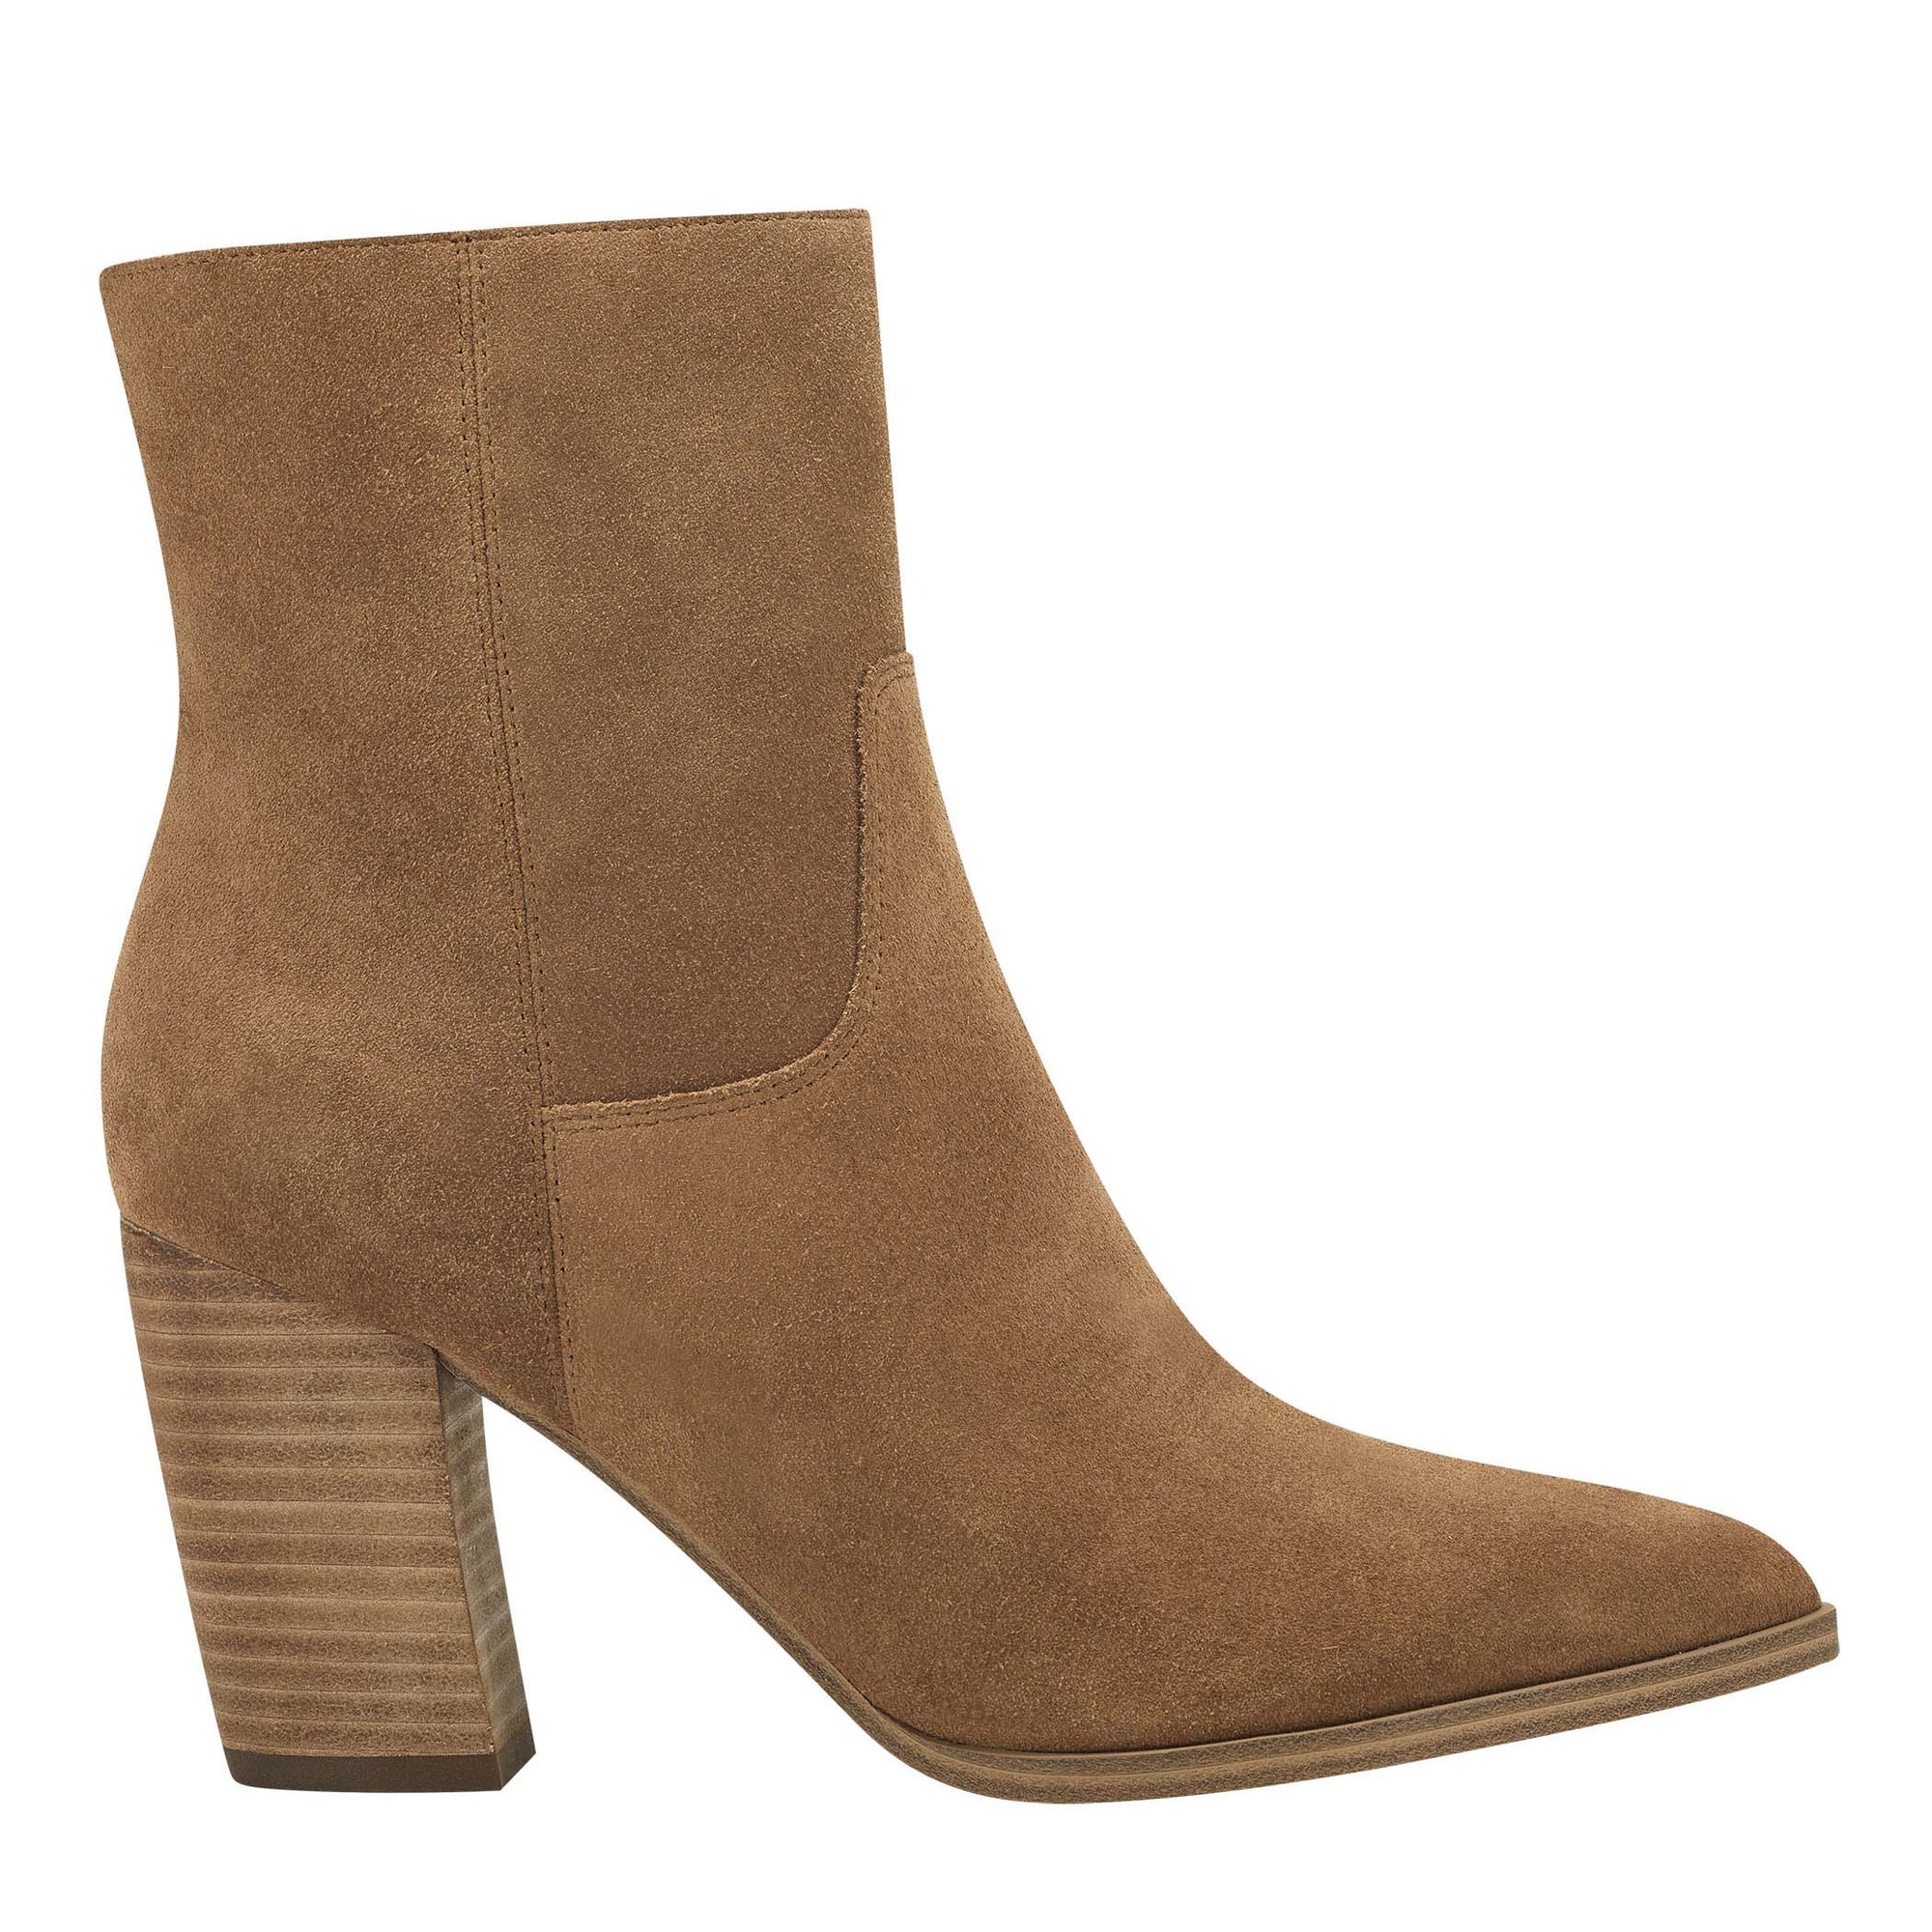 marc fisher pointed toe booties